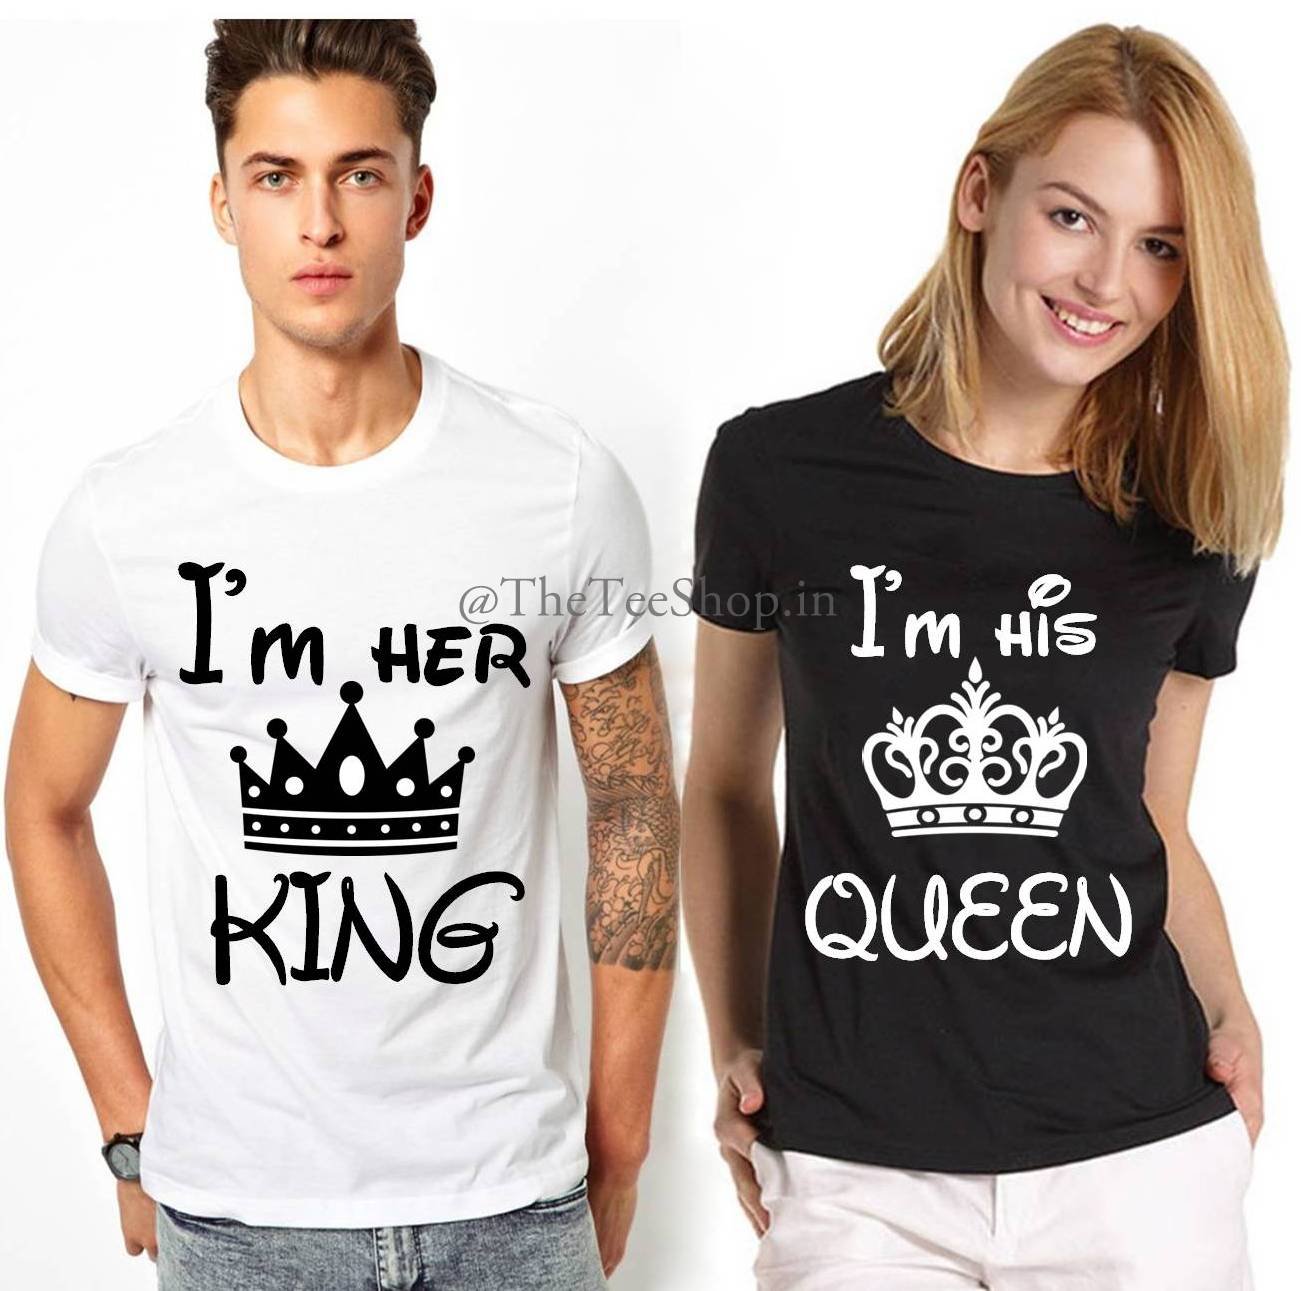 *SALE Couple Tee* - Her King and His Queen